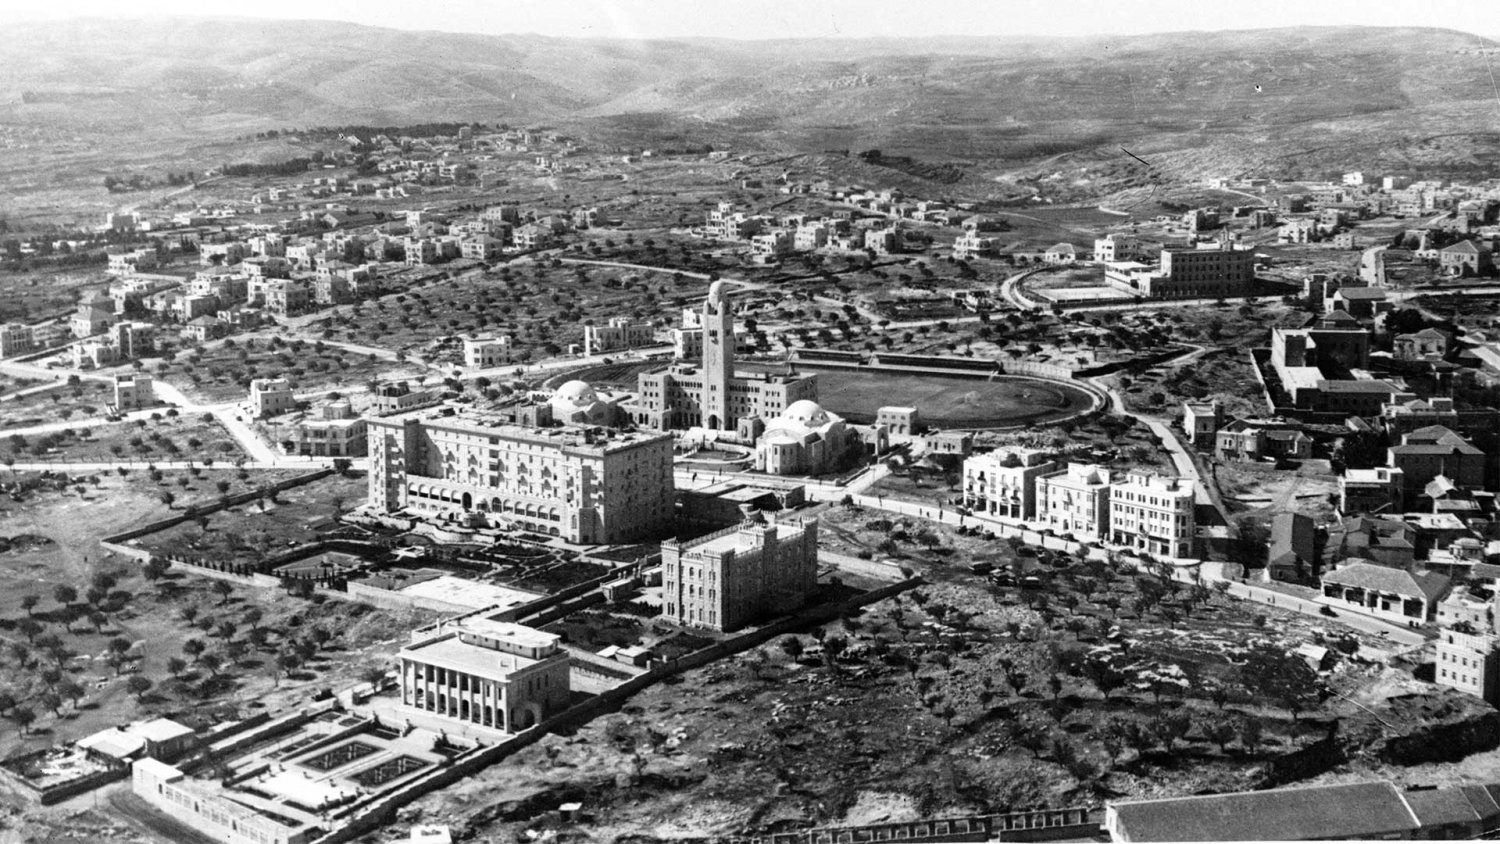 A view of Jerusalem from the air in 1931, with the YMCA and King David Hotel at the center